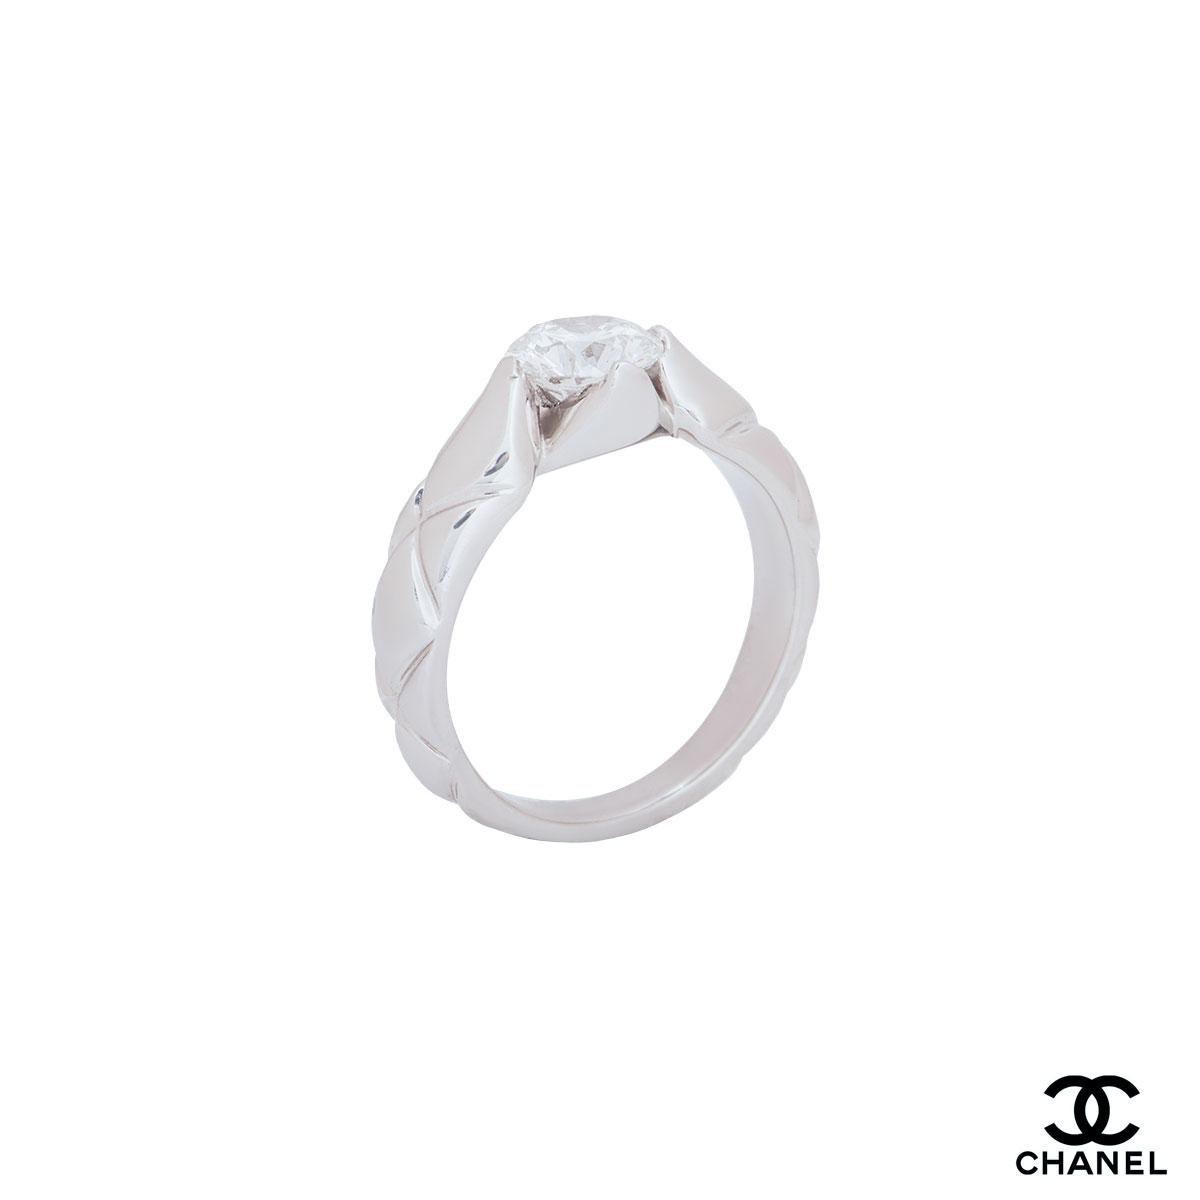 A platinum diamond engagement ring by Chanel from the Coco Crush collection. The ring comprises of a round brilliant cut diamond in a four claw setting with a weight of 1.03ct, F colour and VS1 clarity. The ring is a size UK R/US 8.5/EU 58 but can